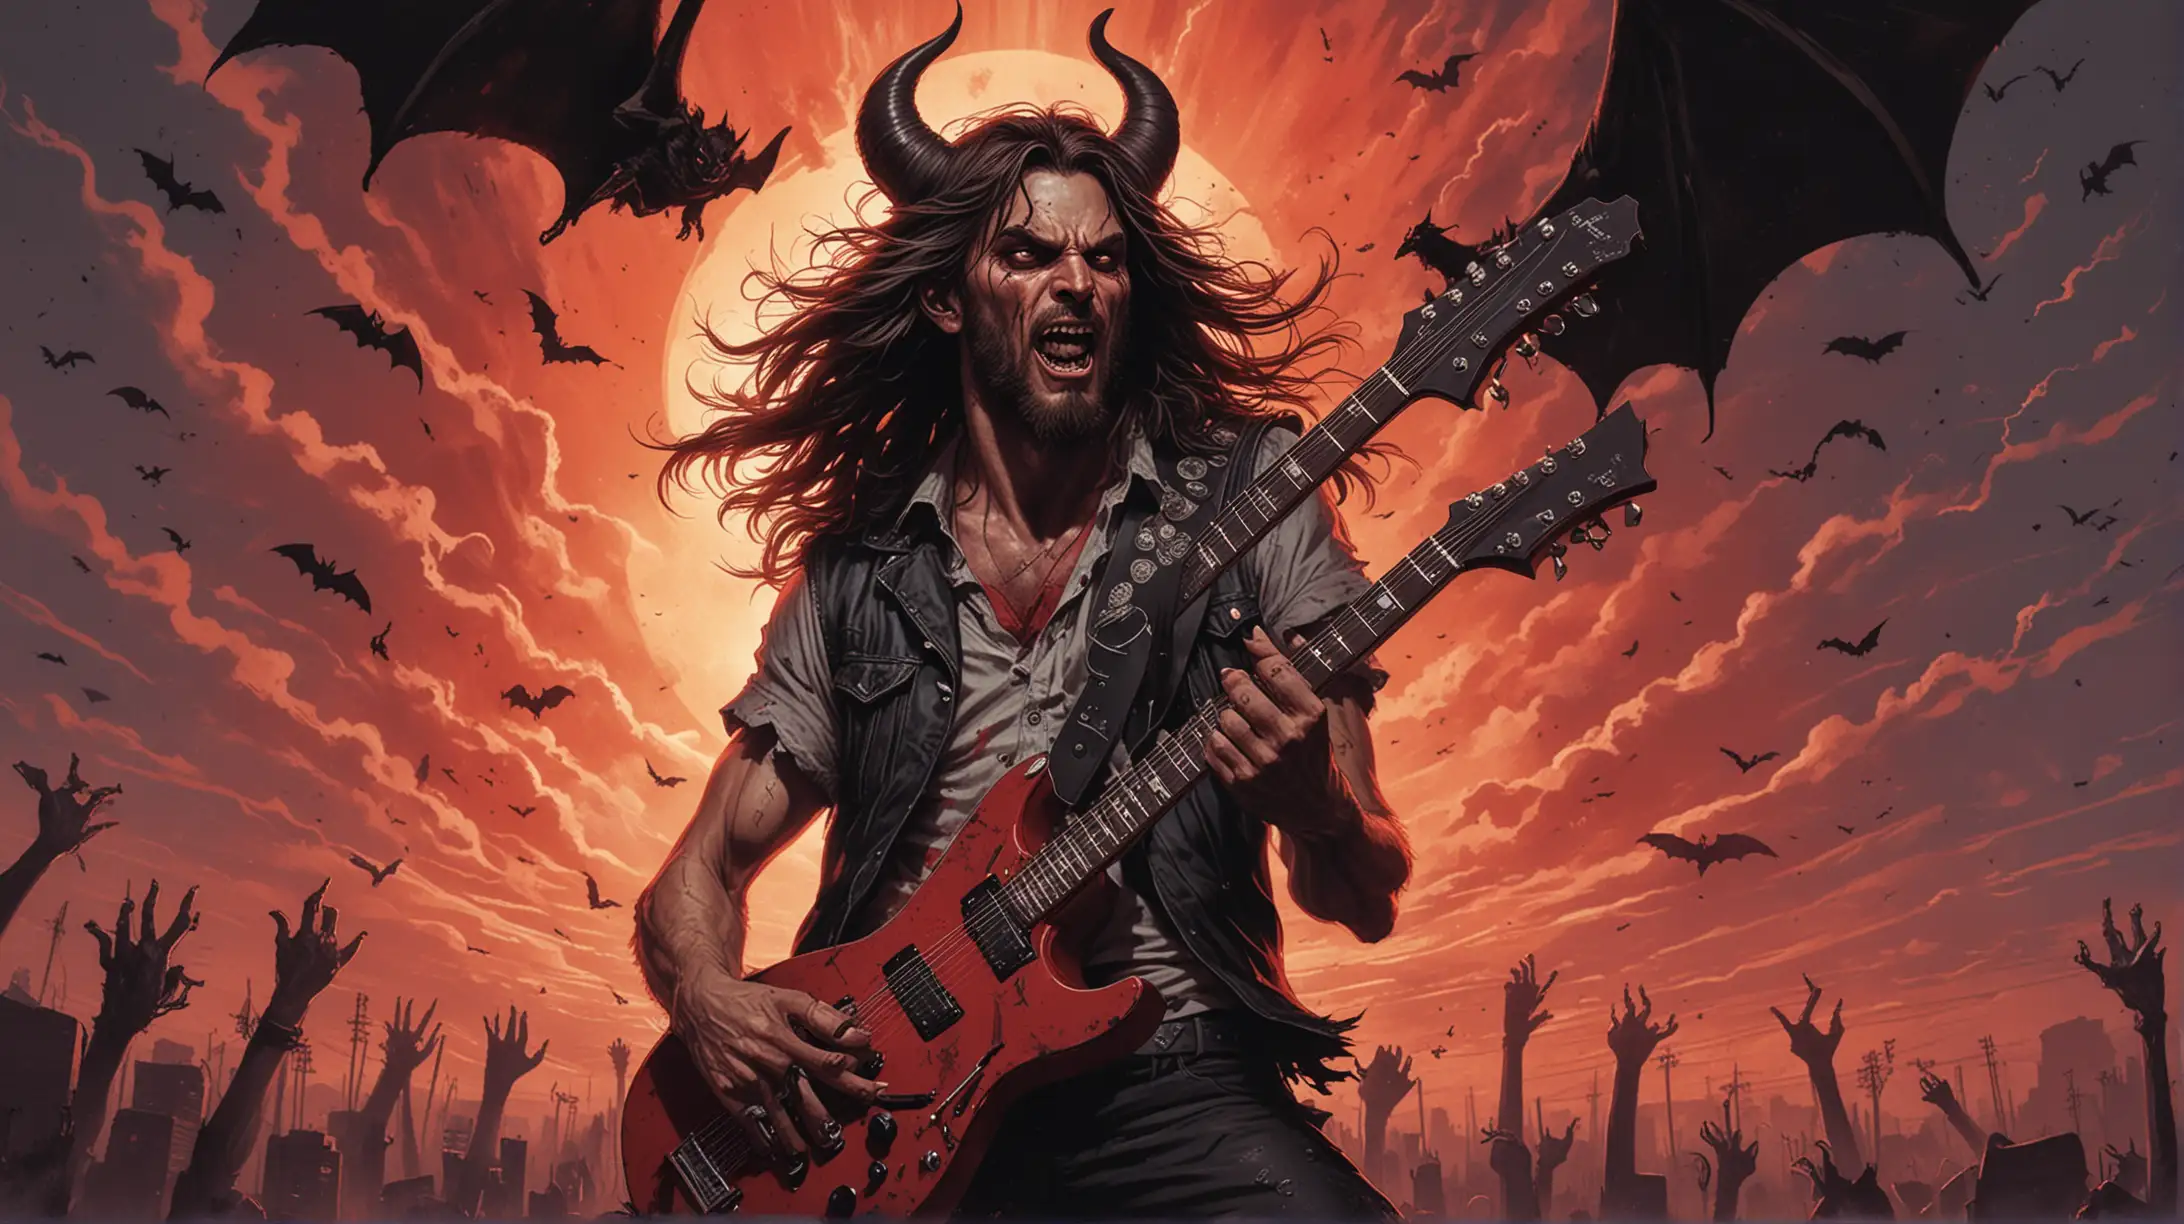 Generate a horror illustration of a long-haired man wearing a bandana, playing a black electric guitar, and wearing a vest. Bats flying overhead with red sky lightning. Bloody and a devil half goat horror 1980s style distress illustration, giving it a graphic novel look. It's very, very stylized. 